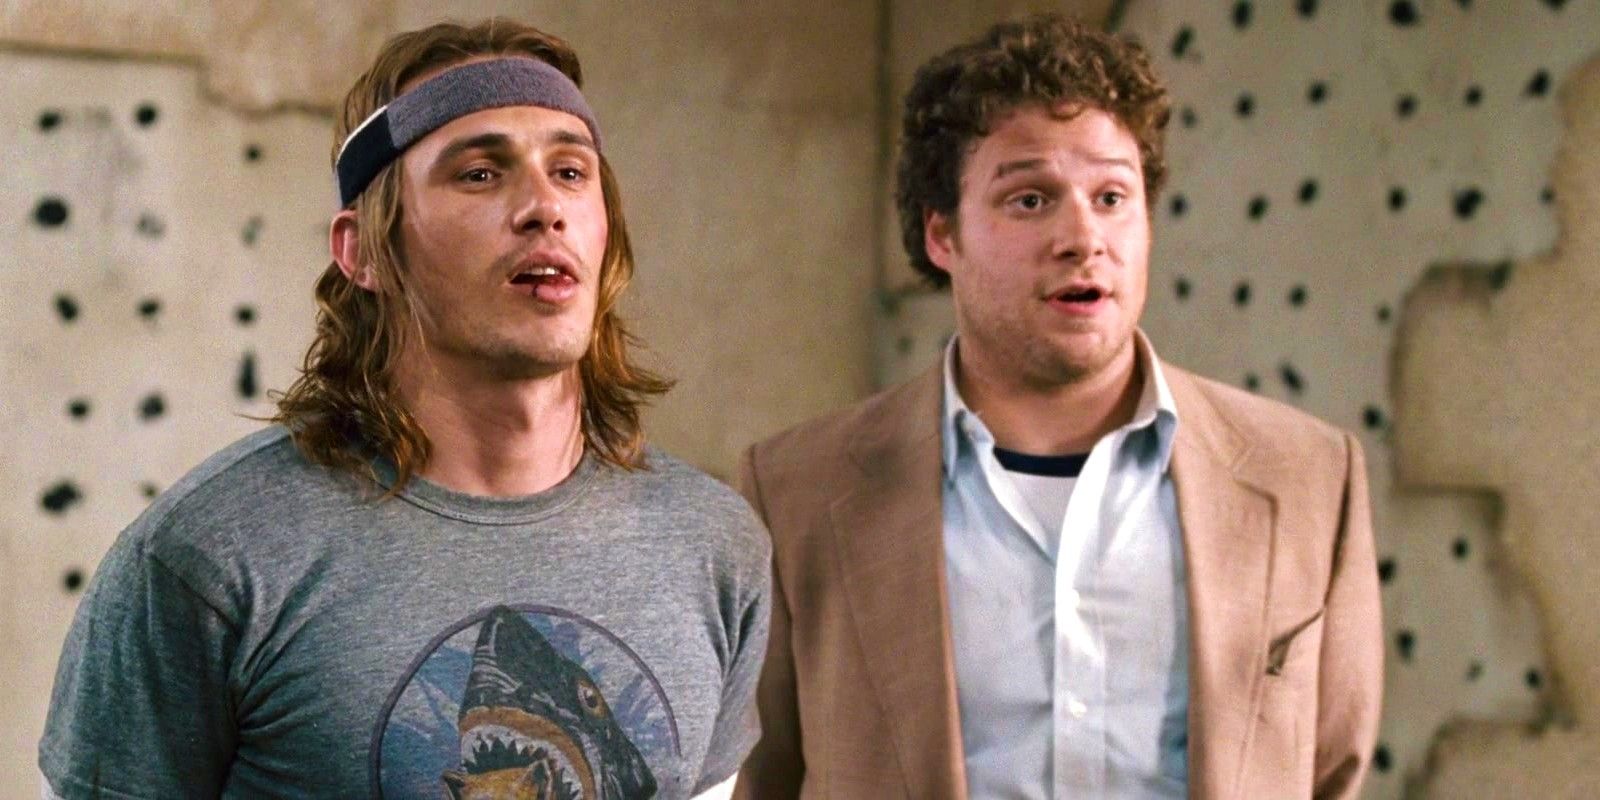 Seth Rogen Refuses to Work With James Franco Due to Abuse Allegations